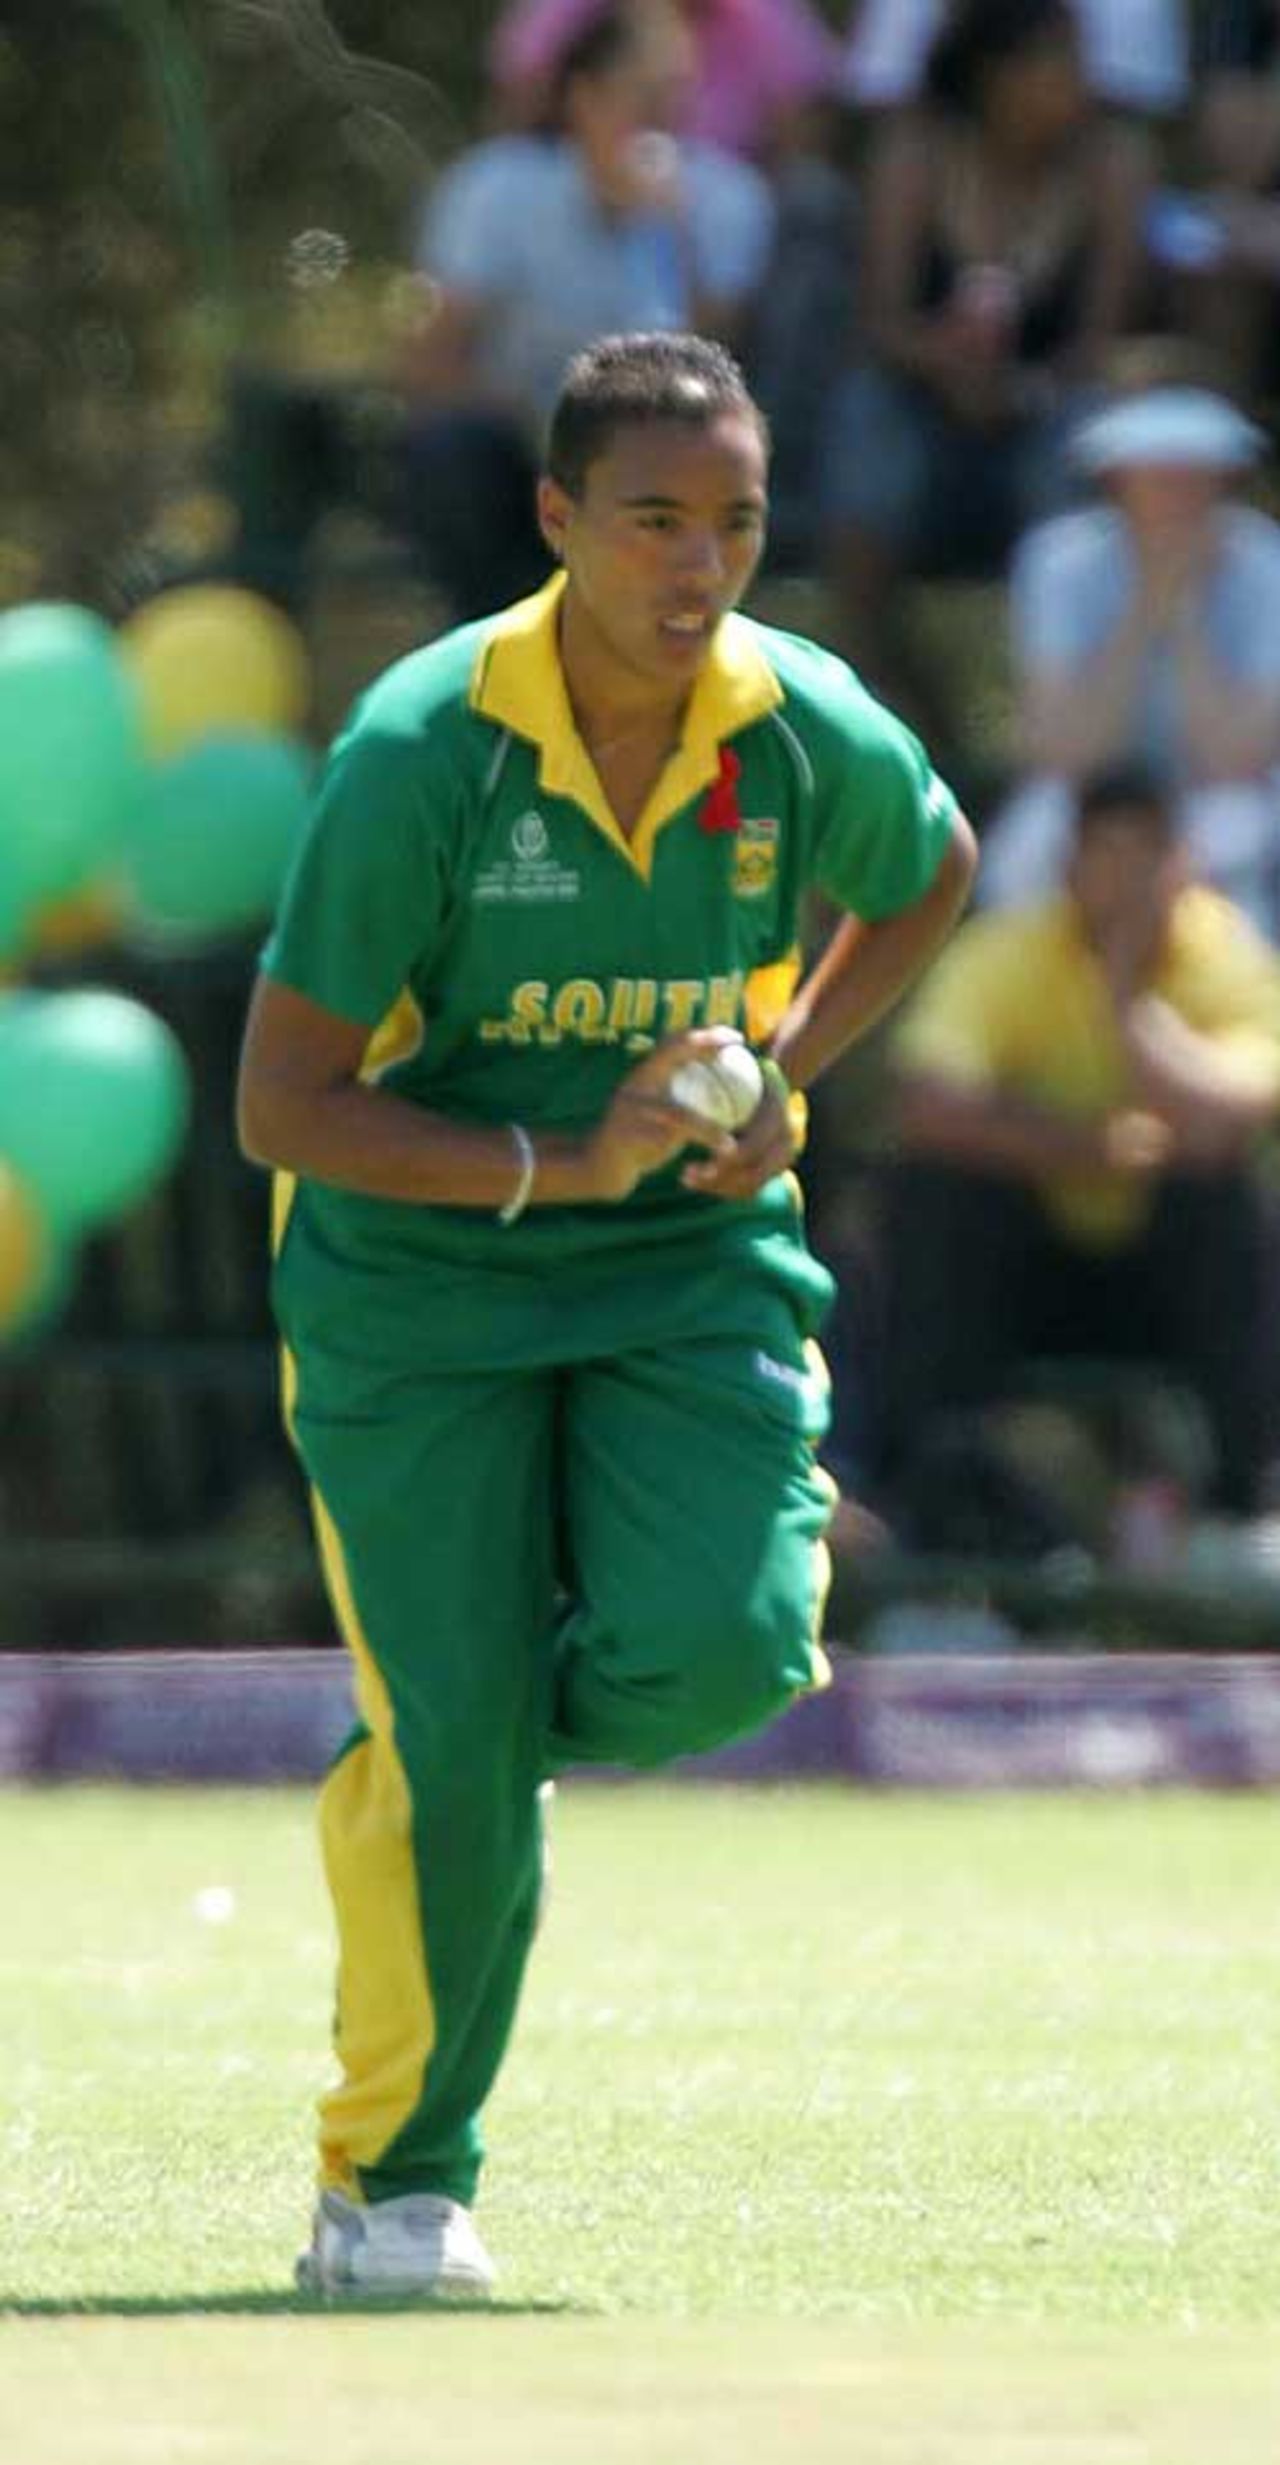 Alicia Smith demolished Pakistan with 5 for 7, South Africa v Pakistan, ICC Women's World Cup Qualifiers final, Stellenbosh, February 24, 2008